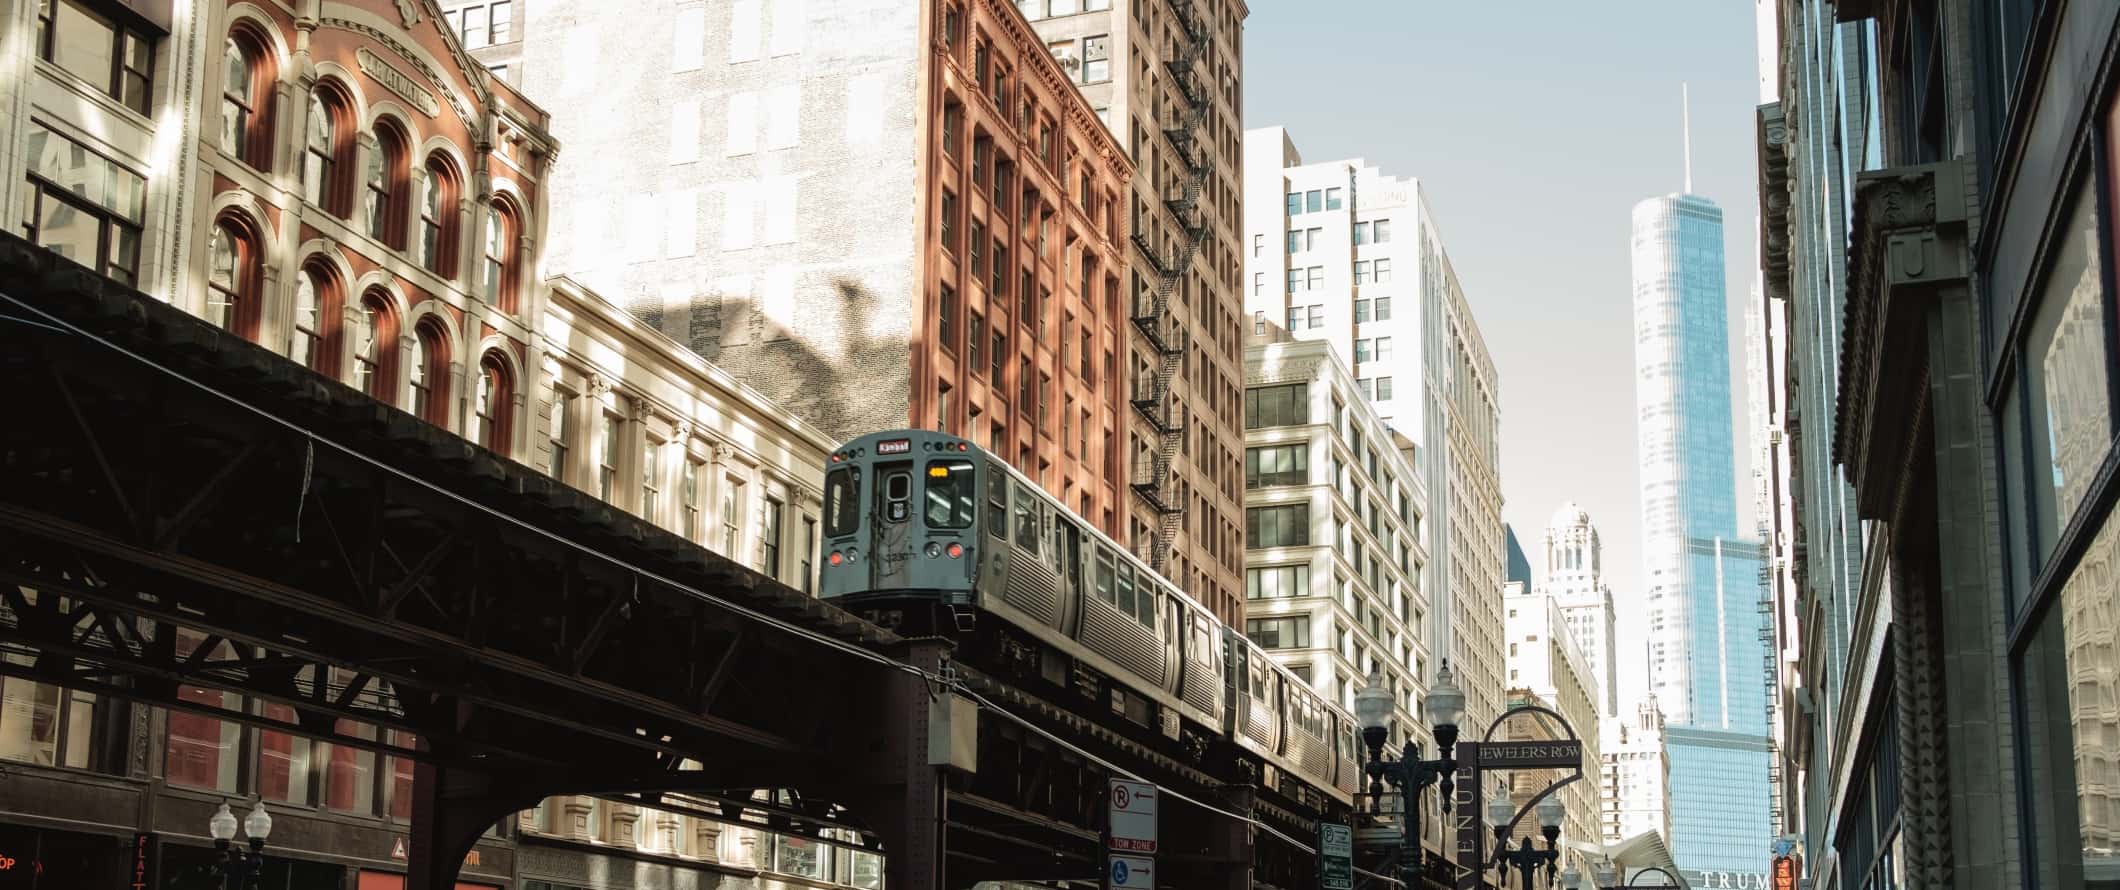 Elevated train going through tall buildings in Chicago, USA.